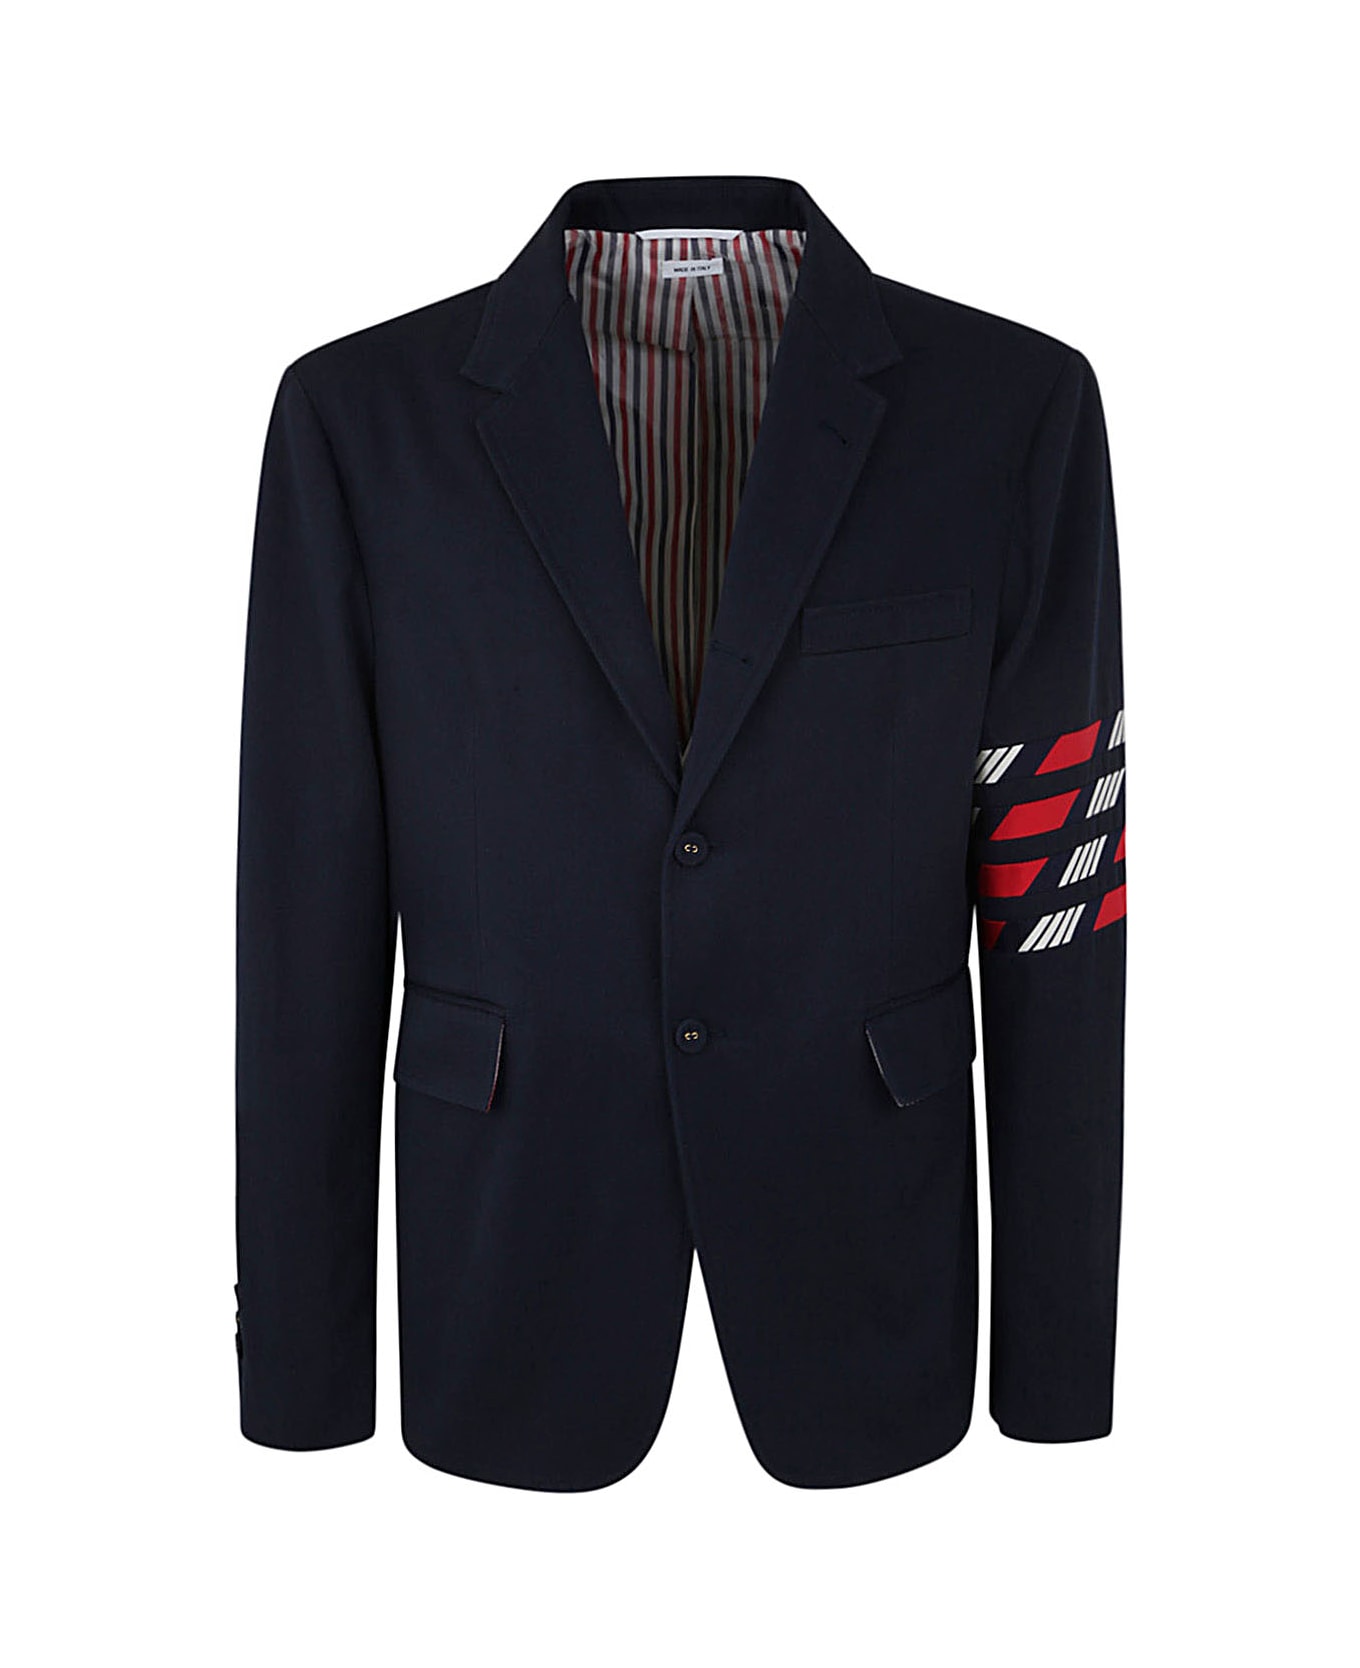 Thom Browne Unconstructed Classic Sport Coat - Fit 1 - With 4 Bar In 4 Bar Repp Stripe Silk Cotton Mogador - Rwbwht